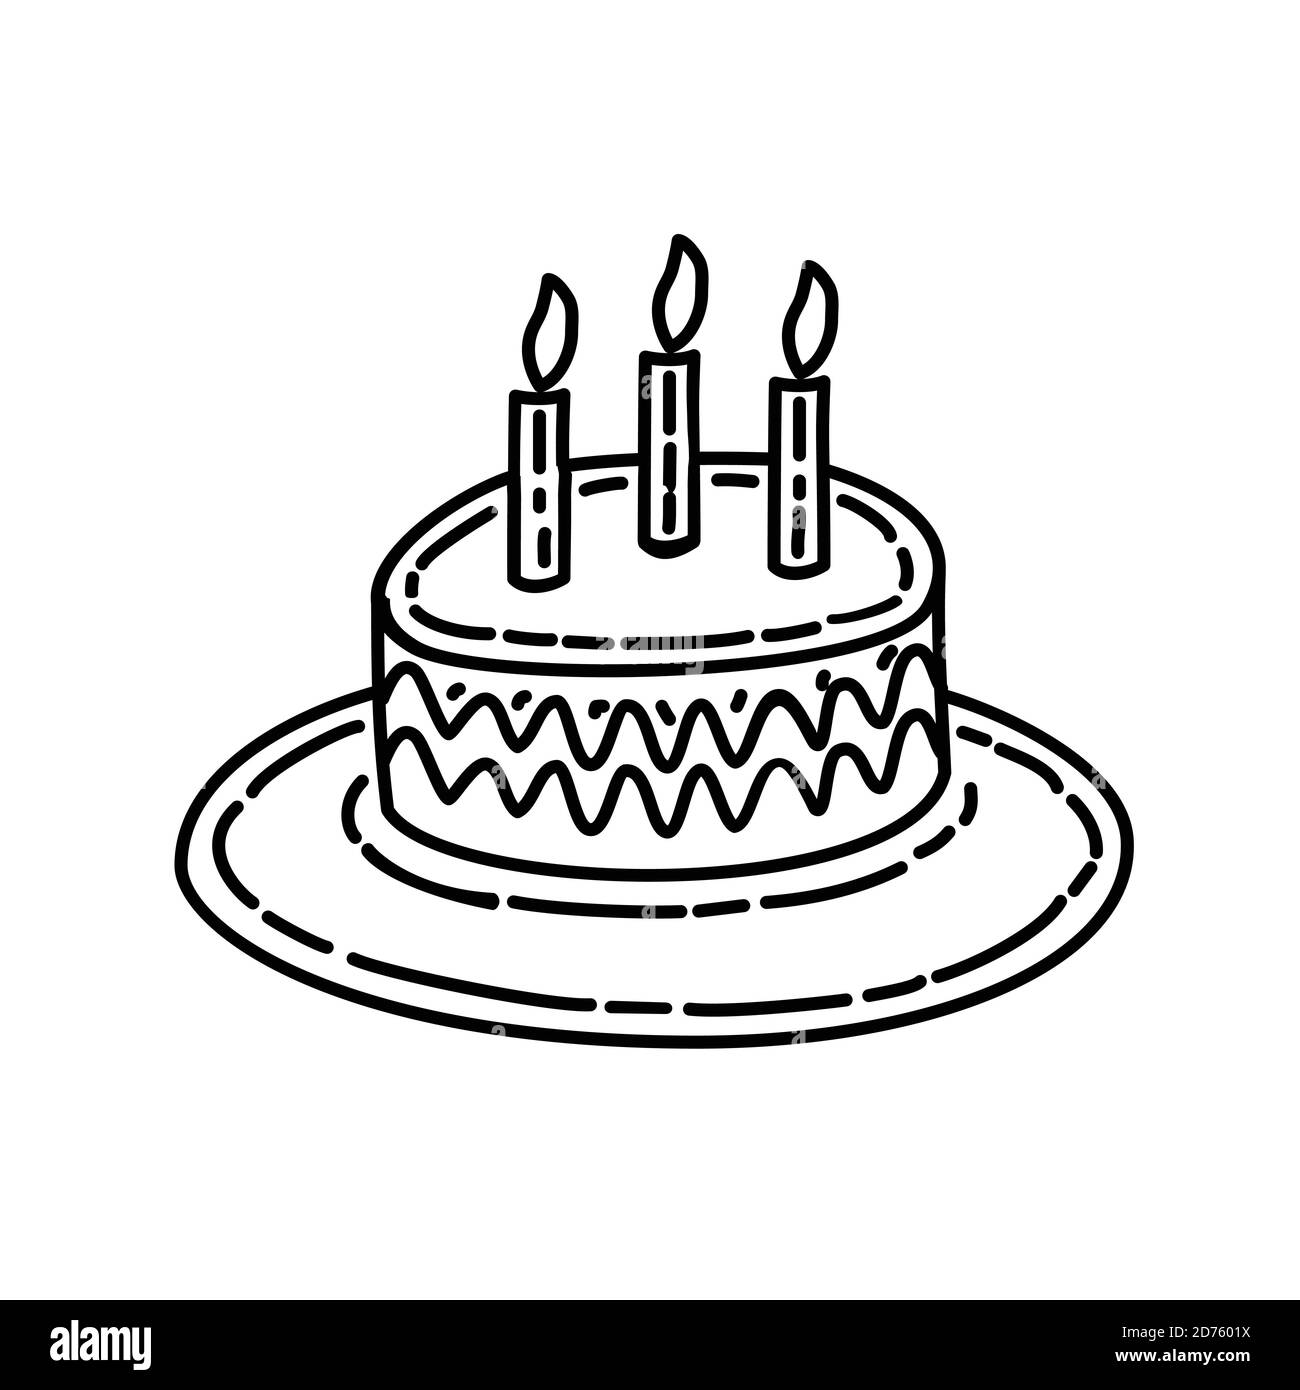 Candle Cake Icon. Doddle Hand Drawn or Black Outline Icon Style Stock Vector